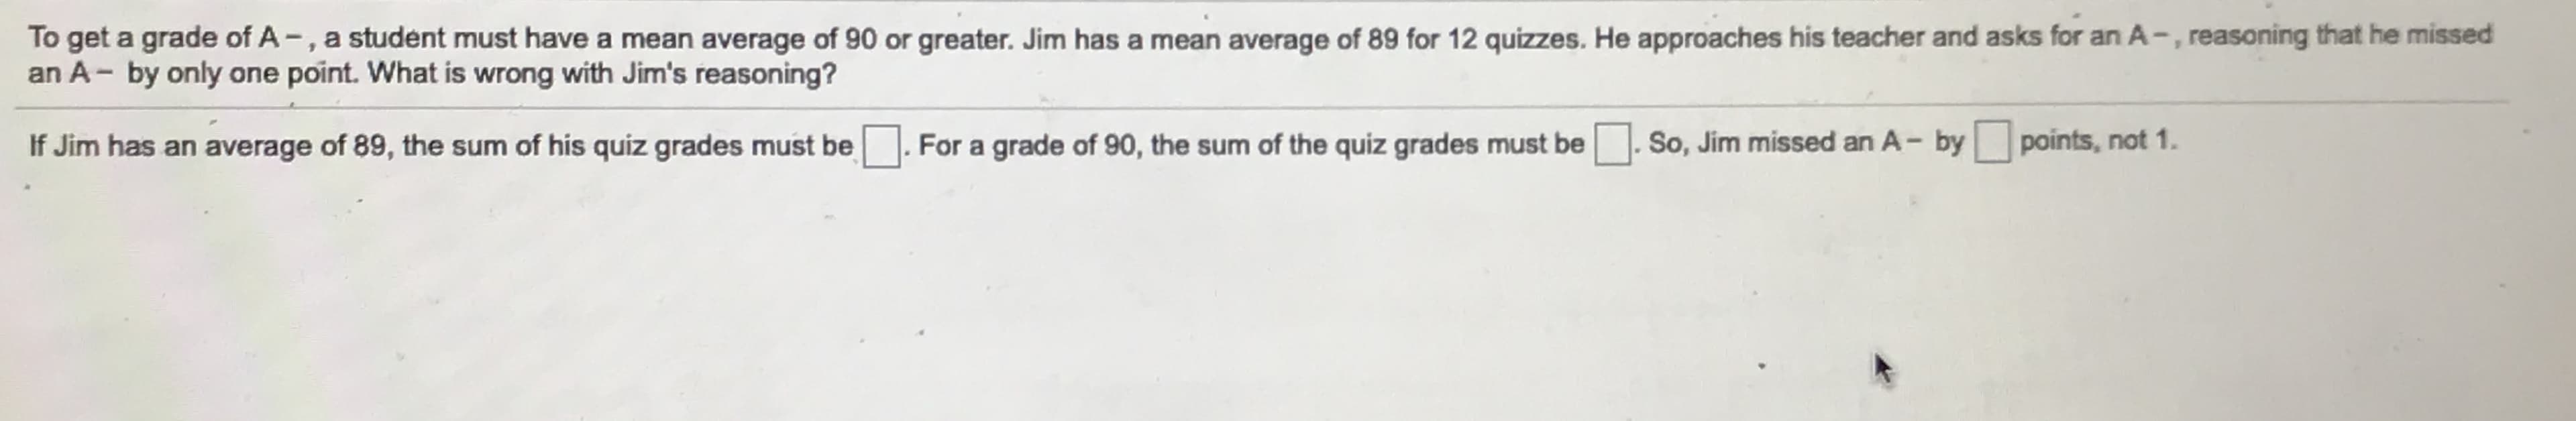 To get a grade of A -, a student must have a mean average of 90 or greater. Jim has a mean average of 89 for 12 quizzes. He approaches his teacher and asks for an A-, reasoning that he missed
an A- by only one point. What is wrong with Jim's reasoning?
If Jim has an average of 89, the sum of his quiz grades must be
For a grade of 90, the sum of the quiz grades must be
So, Jim missed an A- by points, not 1.
